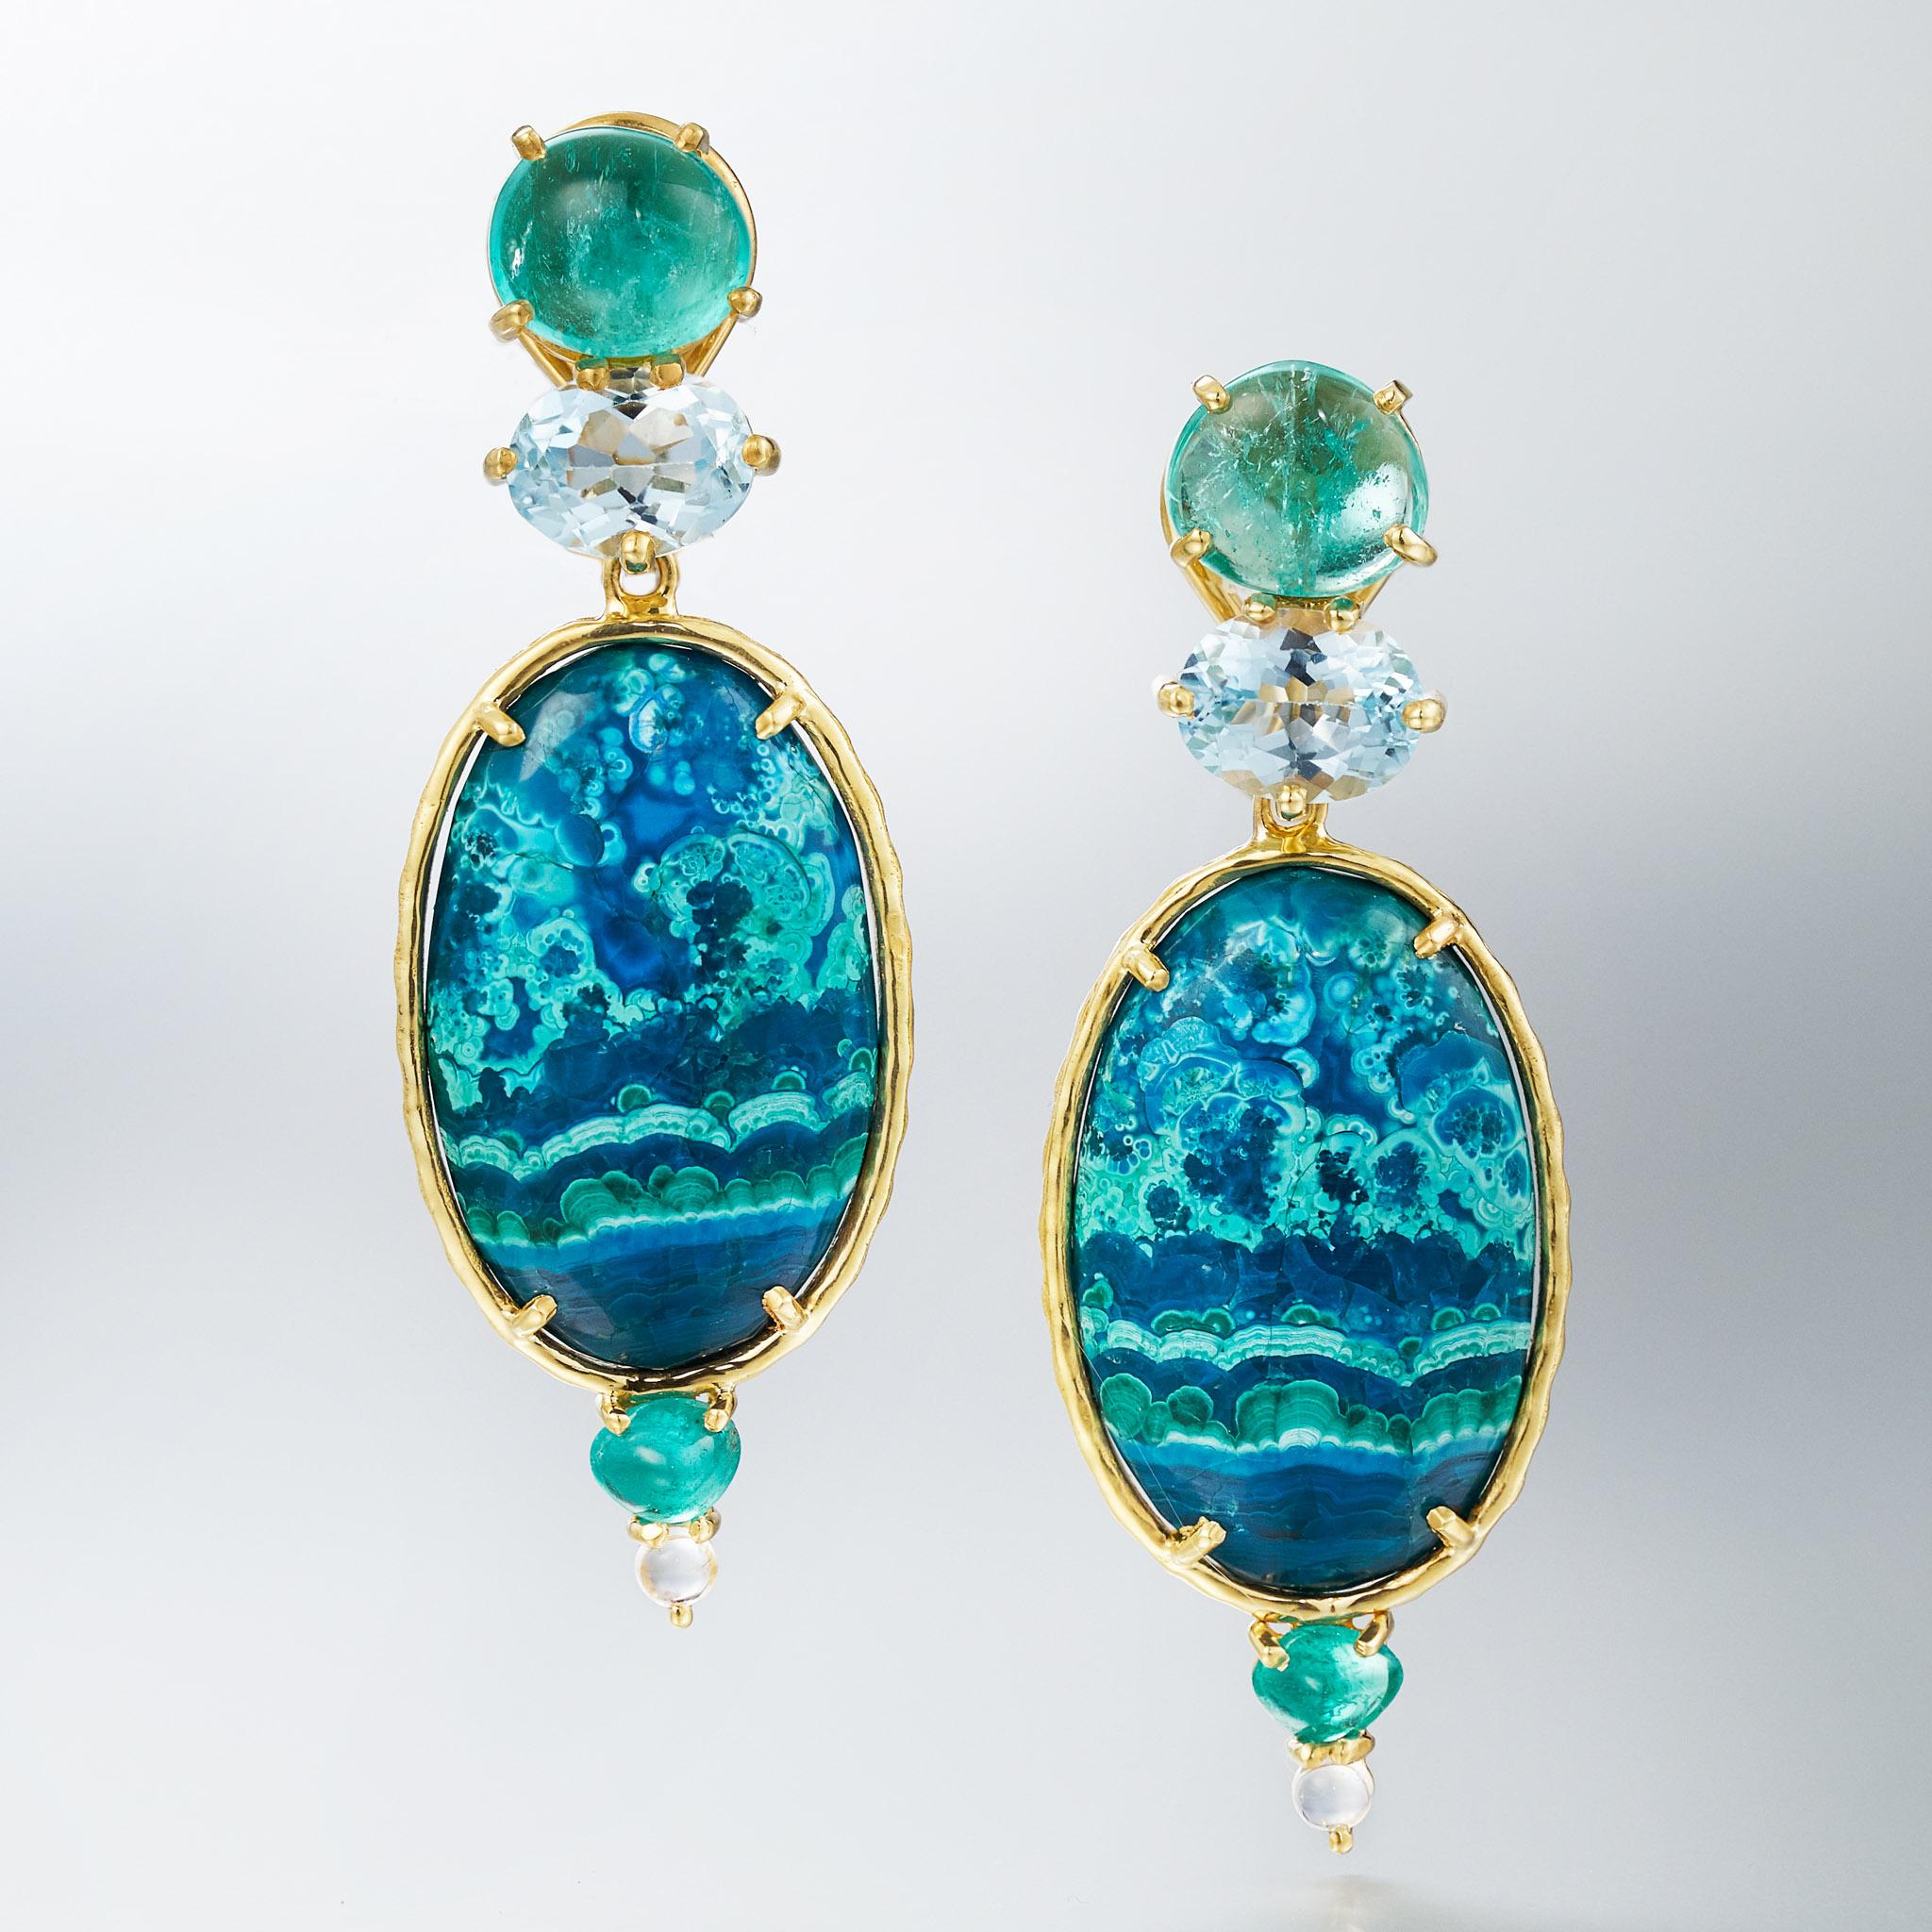 In collaboration with Muzo, the famed emerald mines in Colombia, these earrings feature freeform jelly emeralds, faceted blue topaz, stunning chrysocolla-in-malachite, with trillion-shaped emerald and aquamarine cabochons. Over 7 carats of emerald.